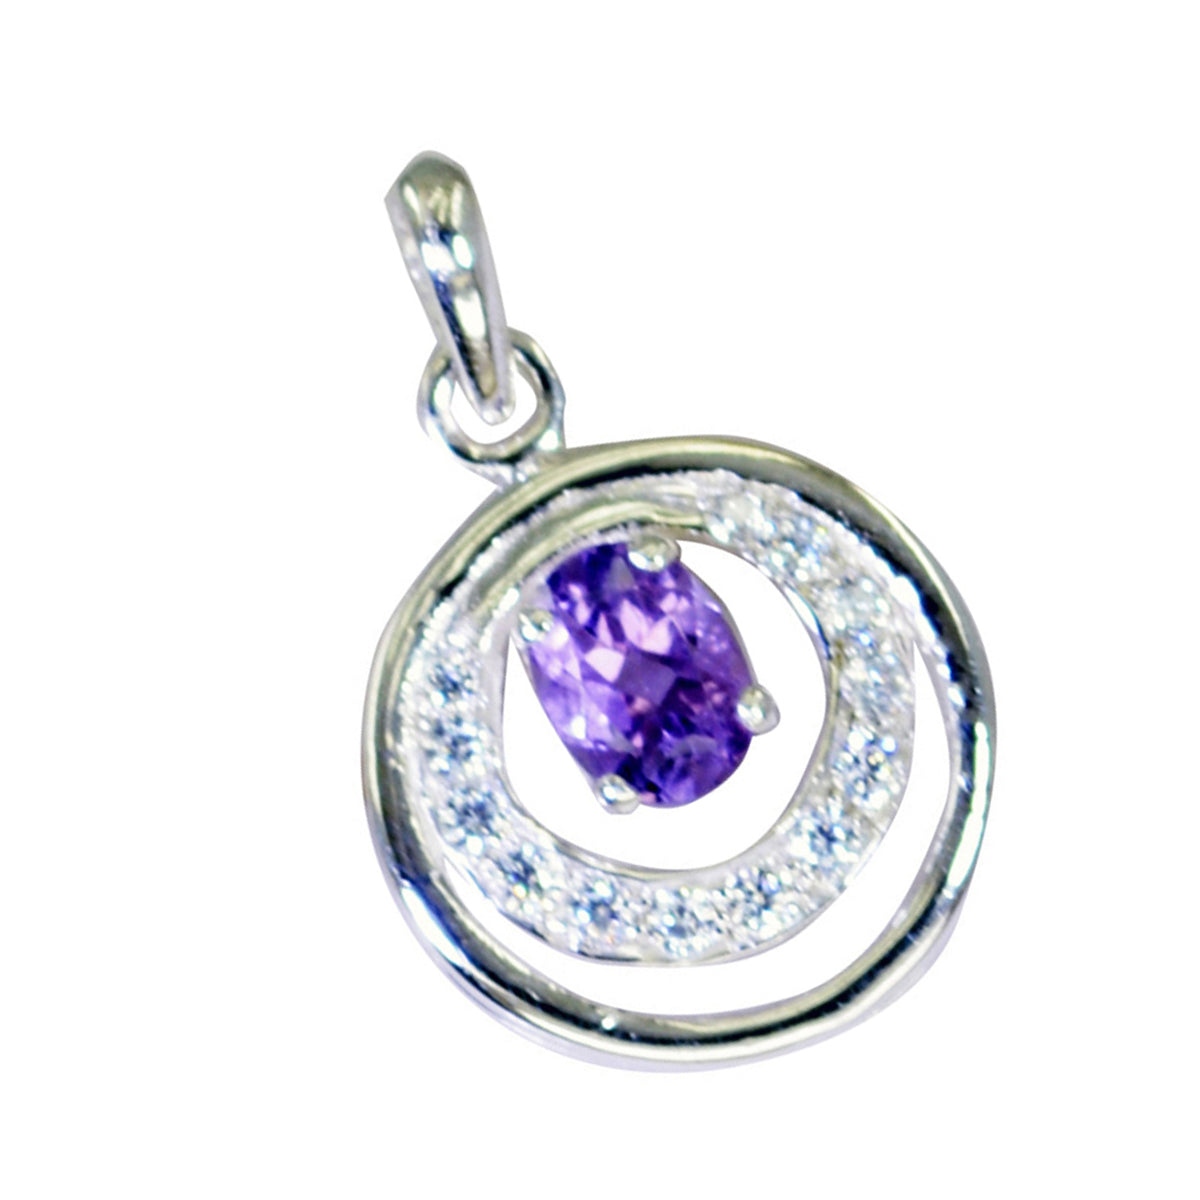 Riyo Attractive Gems Oval Faceted Purple Amethyst Silver Pendant Gift For Boxing Day